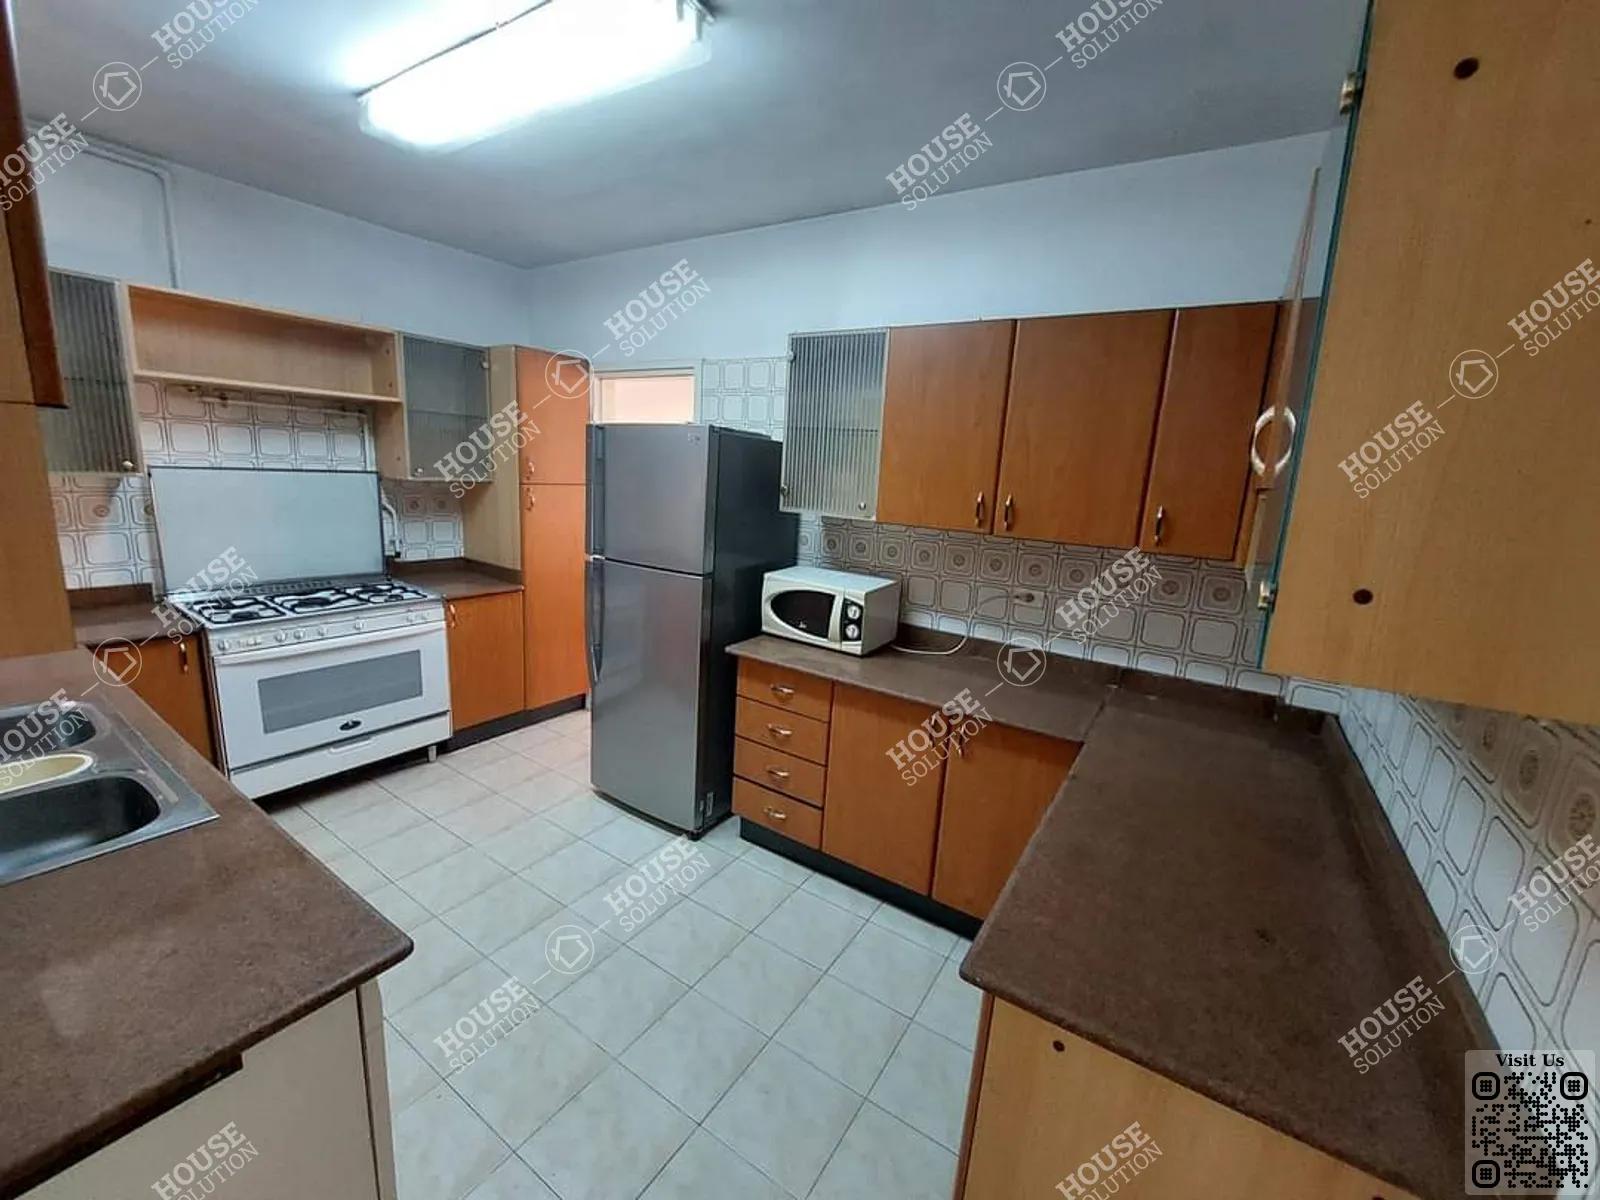 KITCHEN  @ Apartments For Rent In Maadi Maadi Degla Area: 180 m² consists of 3 Bedrooms 3 Bathrooms Furnished 5 stars #3661-1